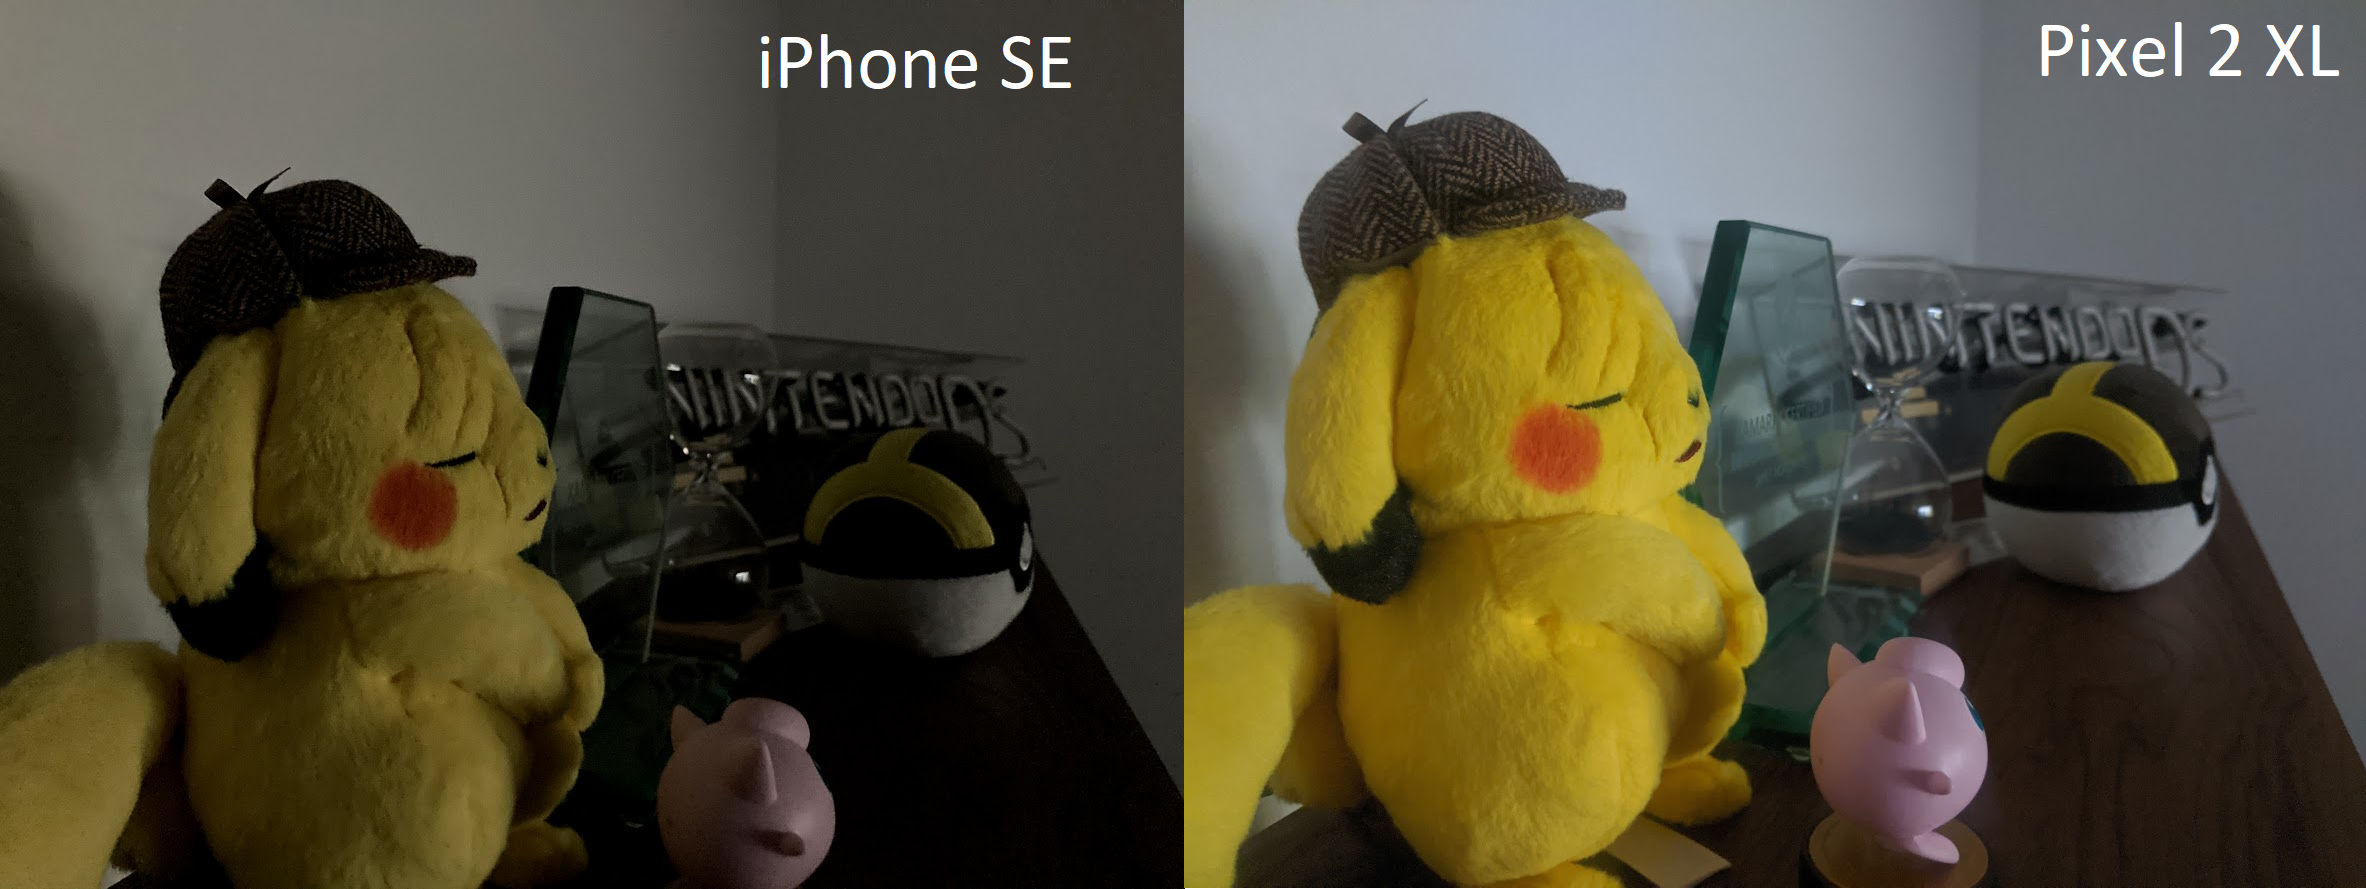 Side by side iPhone SE vs Pixel 2 XL pictures of Pikachu, pokeball, and neon sign on wood at night